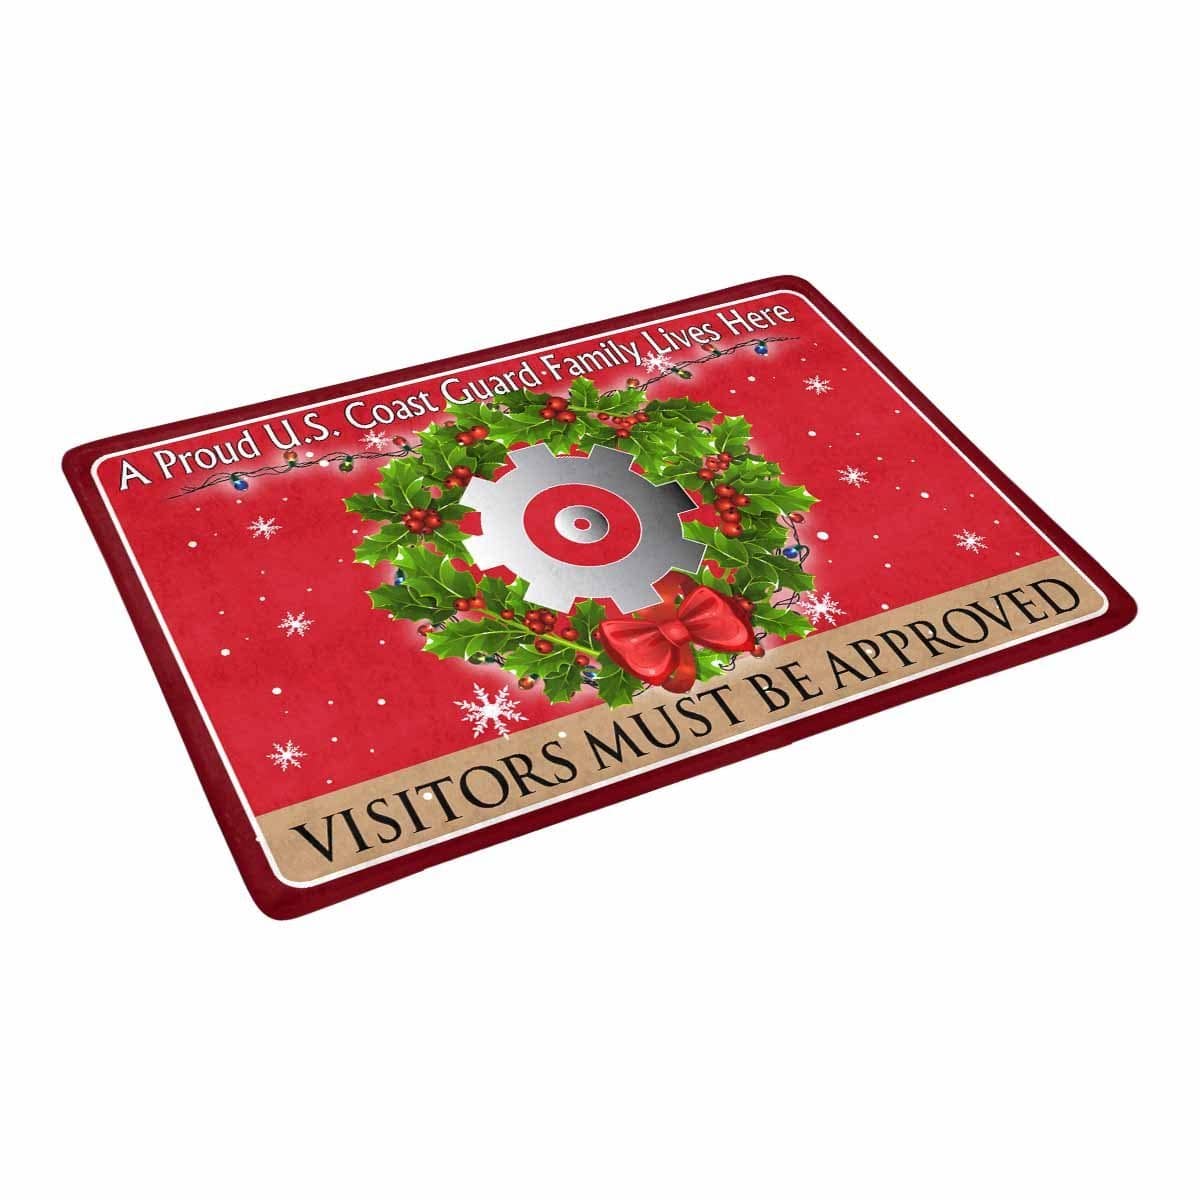 US Coast Guard Machinery Technician MK Logo - Visitors must be approved Christmas Doormat-Doormat-USCG-Rate-Veterans Nation